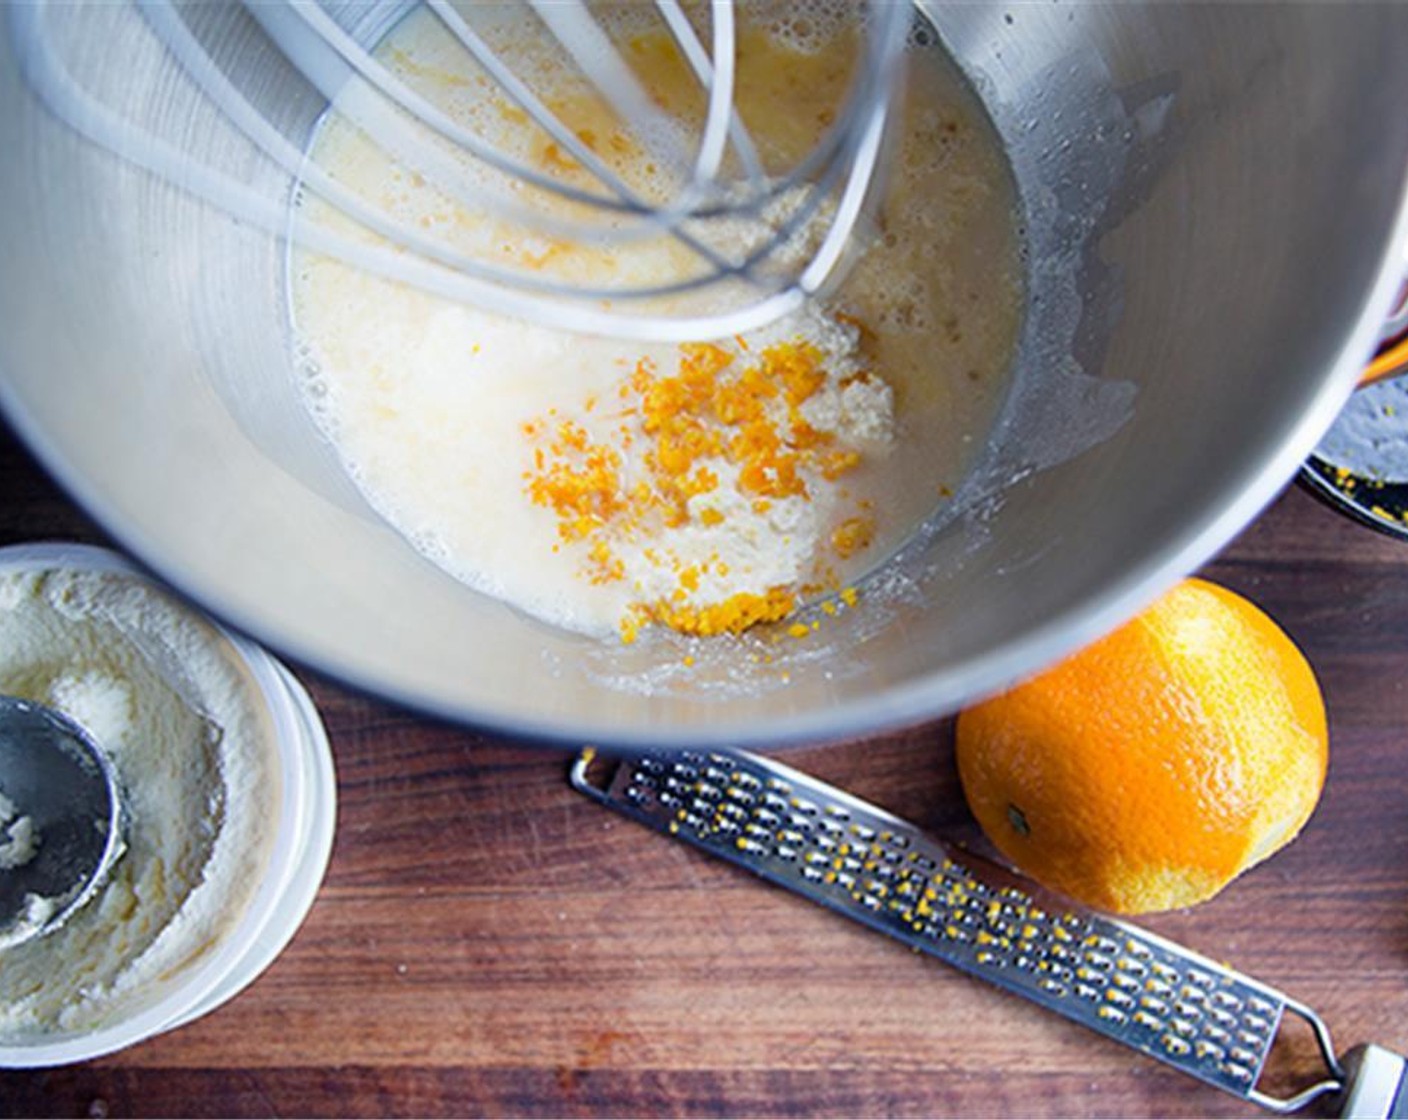 step 2 Stir Milk (1/2 cup), Granulated Sugar (1/2 cup), zest and juice from Oranges (2), Ricotta Cheese (1/2 cup), Salt (1/2 tsp) and Egg (1) into the yeast mixture.